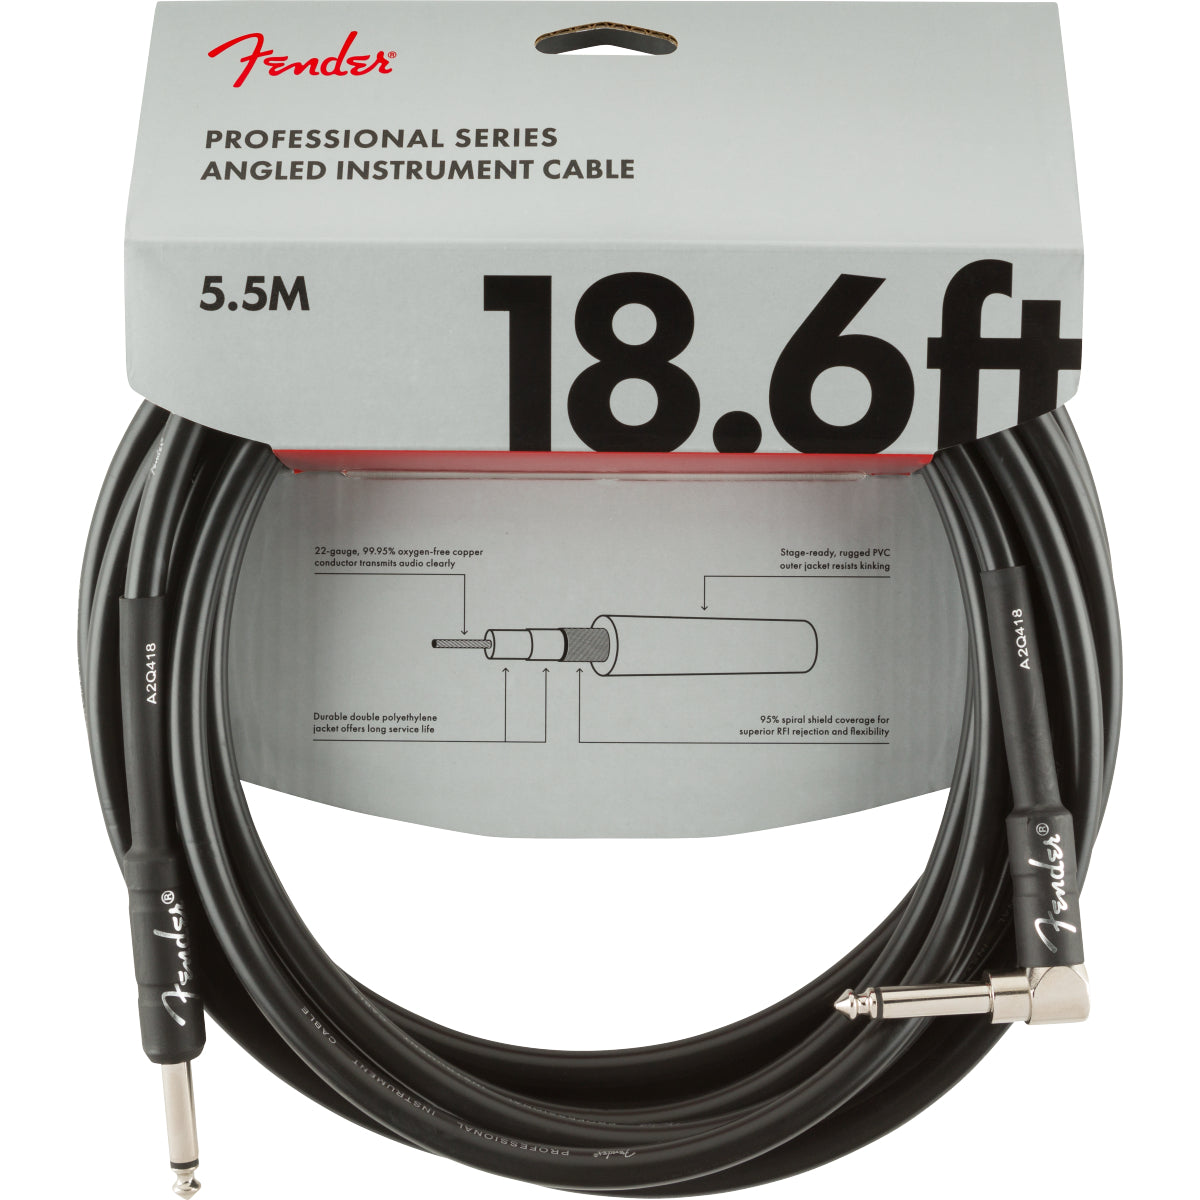 Pro 18.6' Angled Instrument Cable, Black